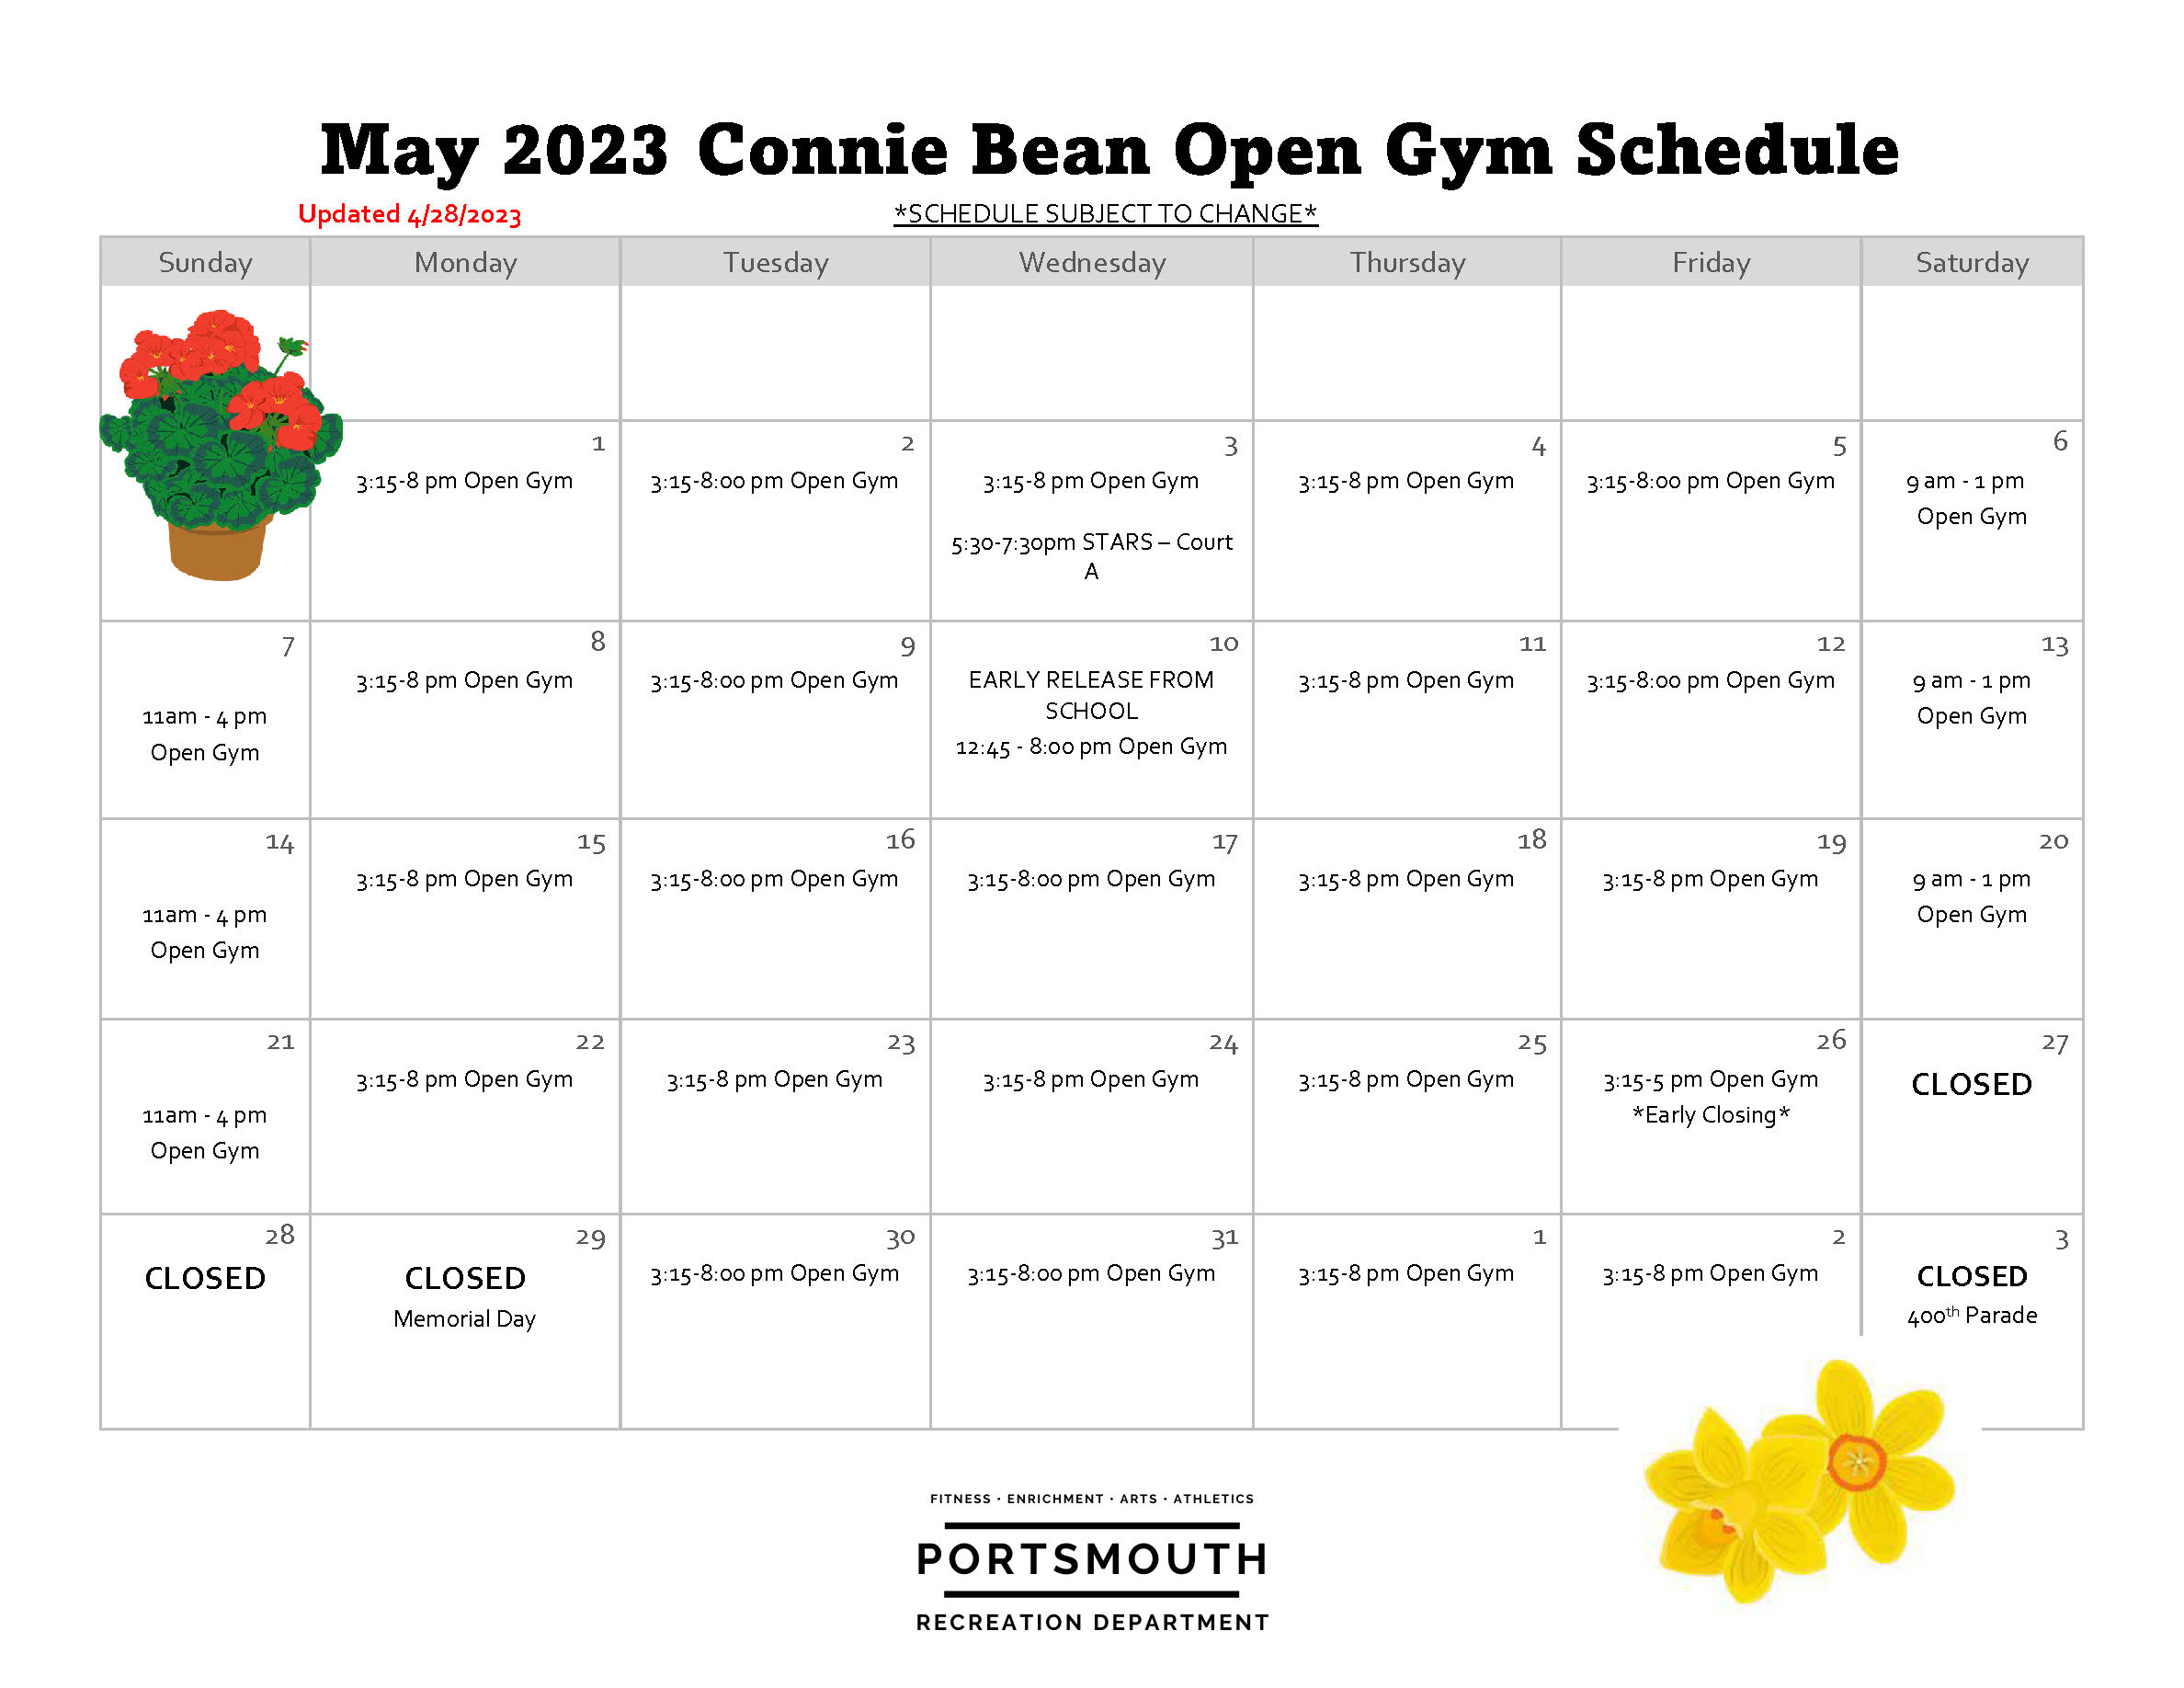 Connie Bean - May open gym